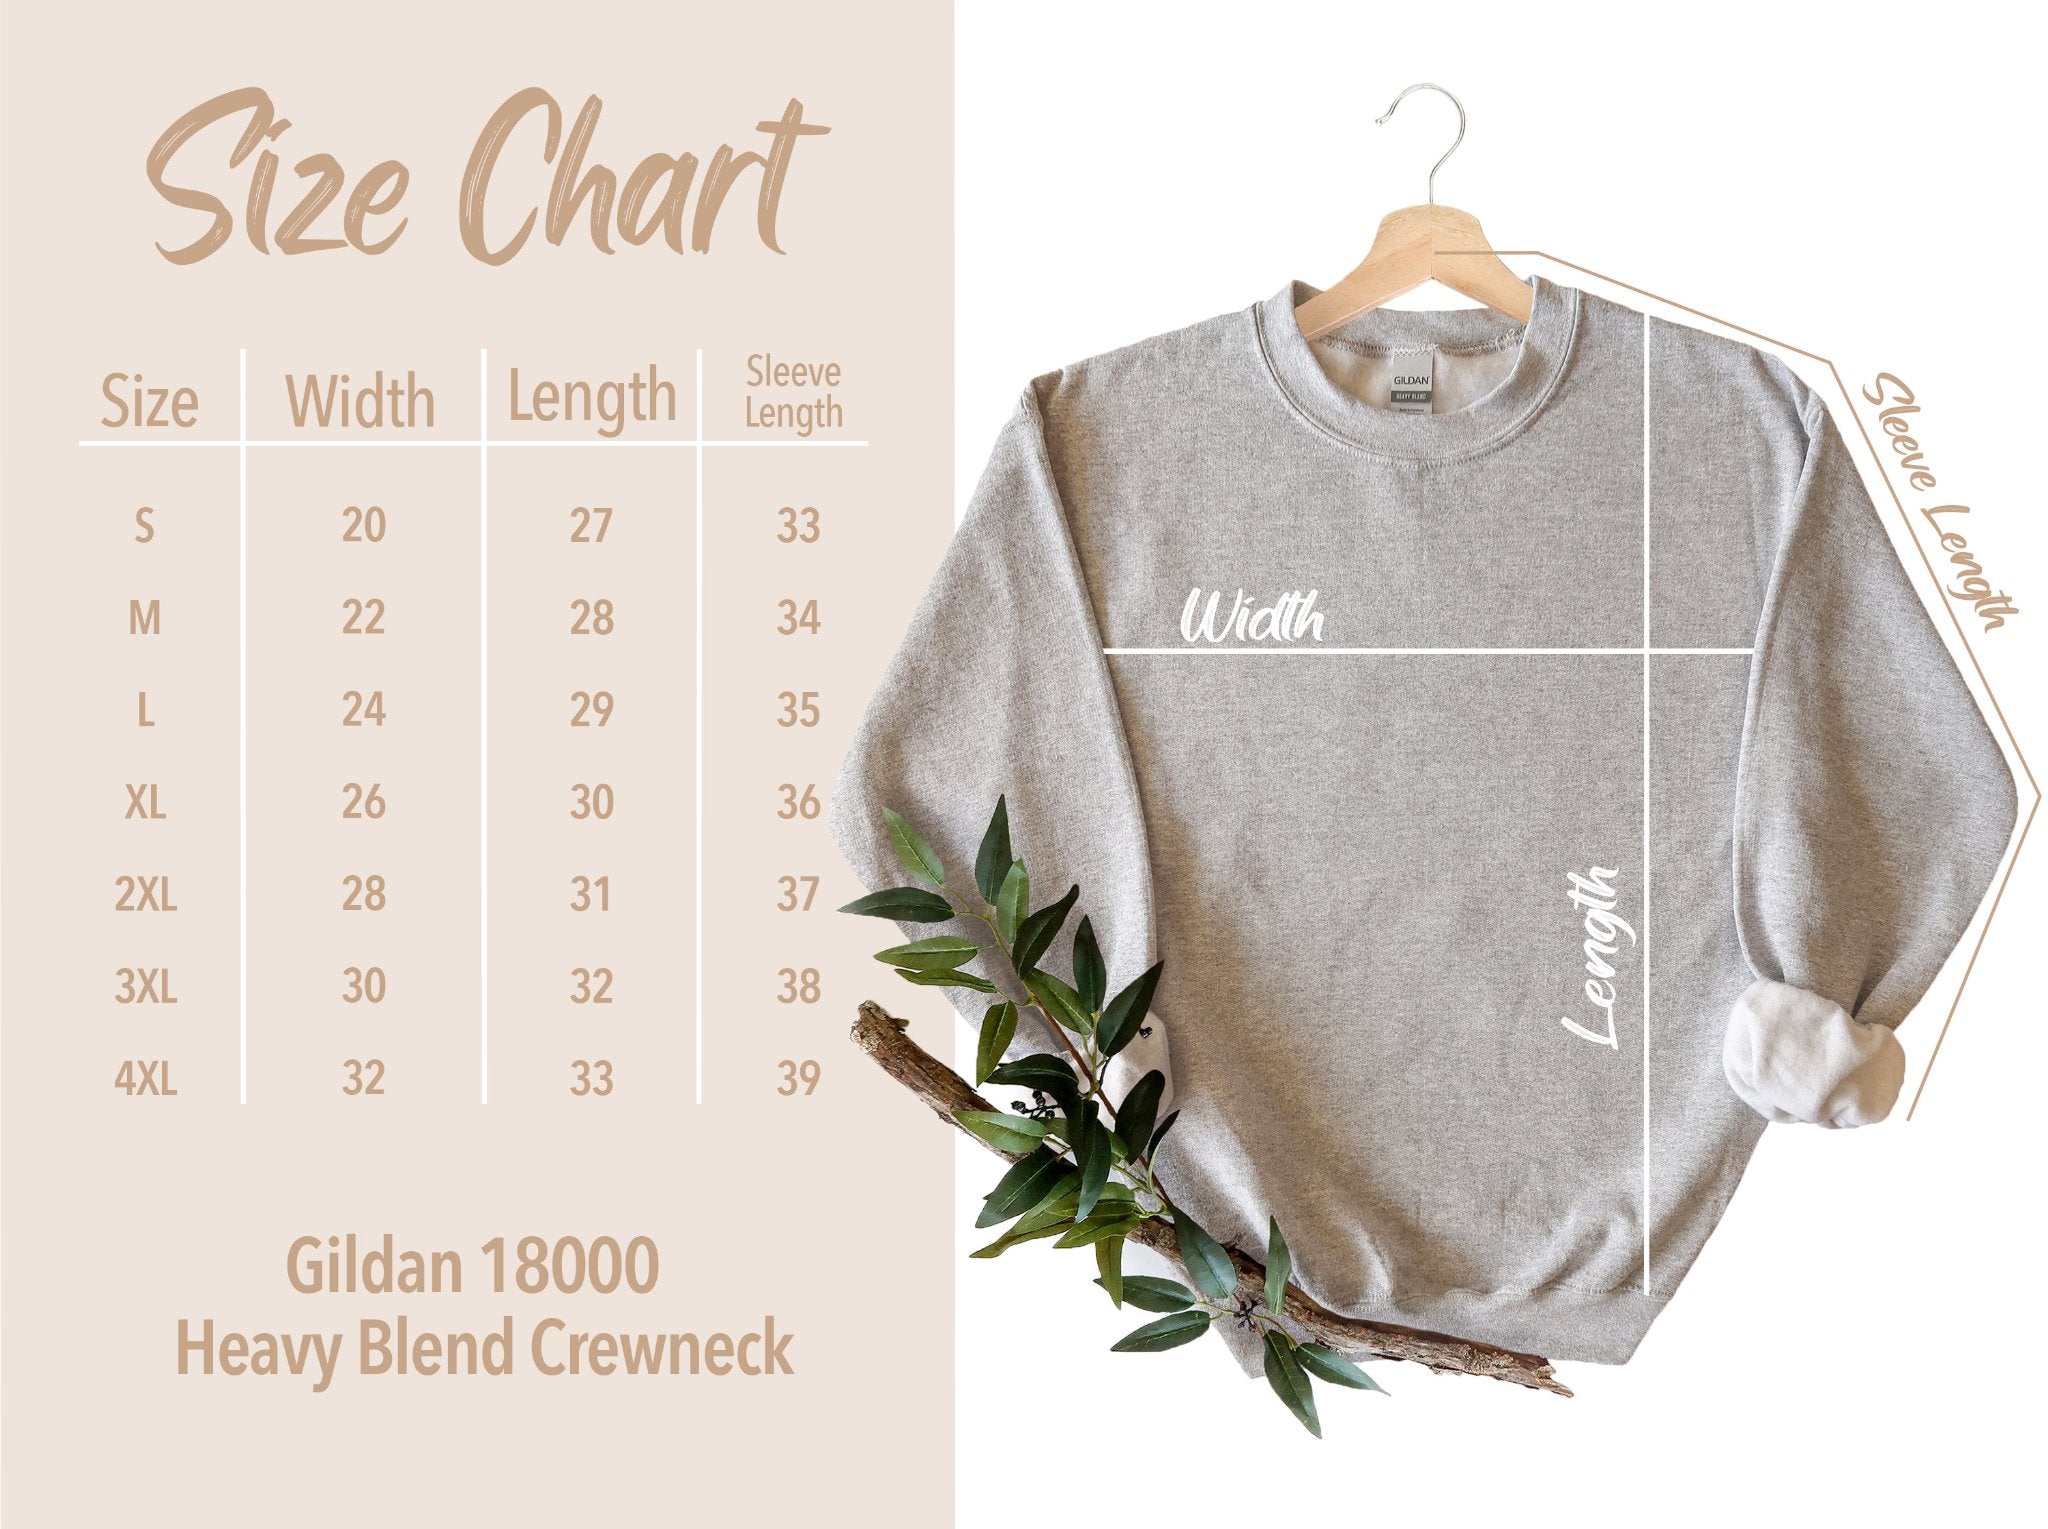 Fueled by Coffee and Christmas Cheer Christmas Sweatshirt - Trendznmore